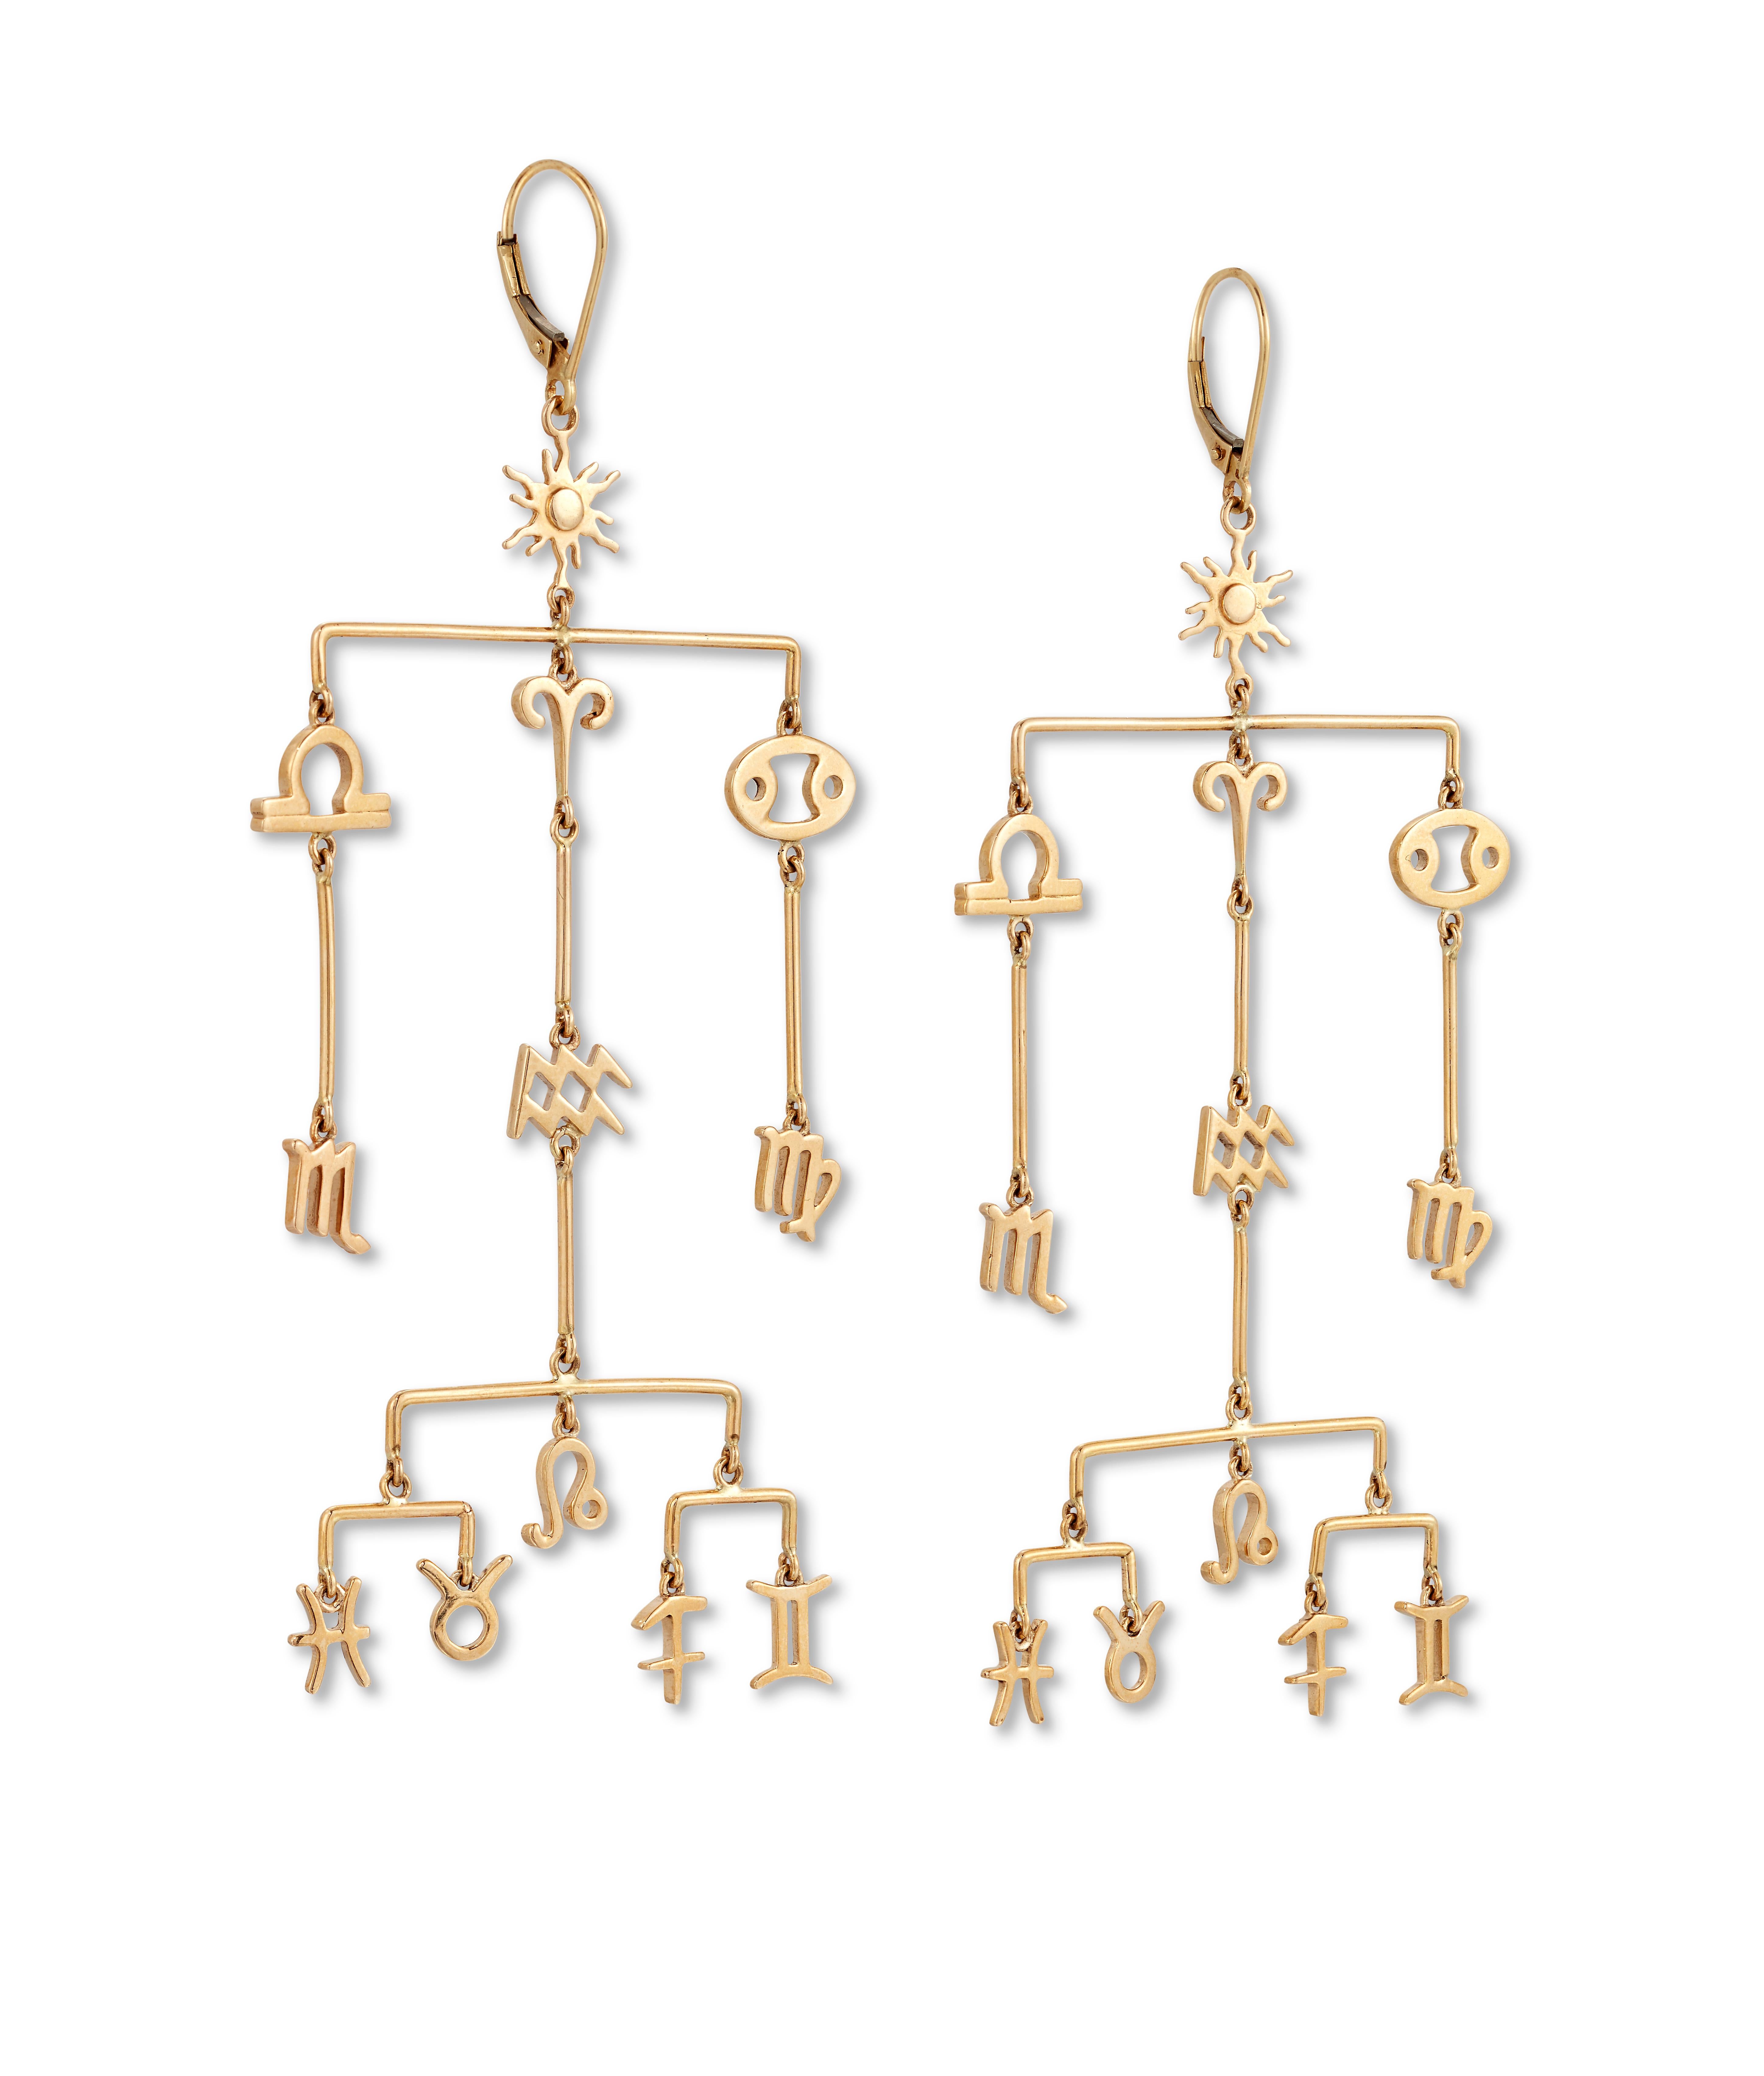 Handmade Articulated large Pendant Earrings, suspending 12 Sun signs with hook fittings, set in 9ct gold.

12 Sun signs representing all the Zodiac signs of the Astrological table. Each earring beautifully finished and balanced, fun easy to wear,